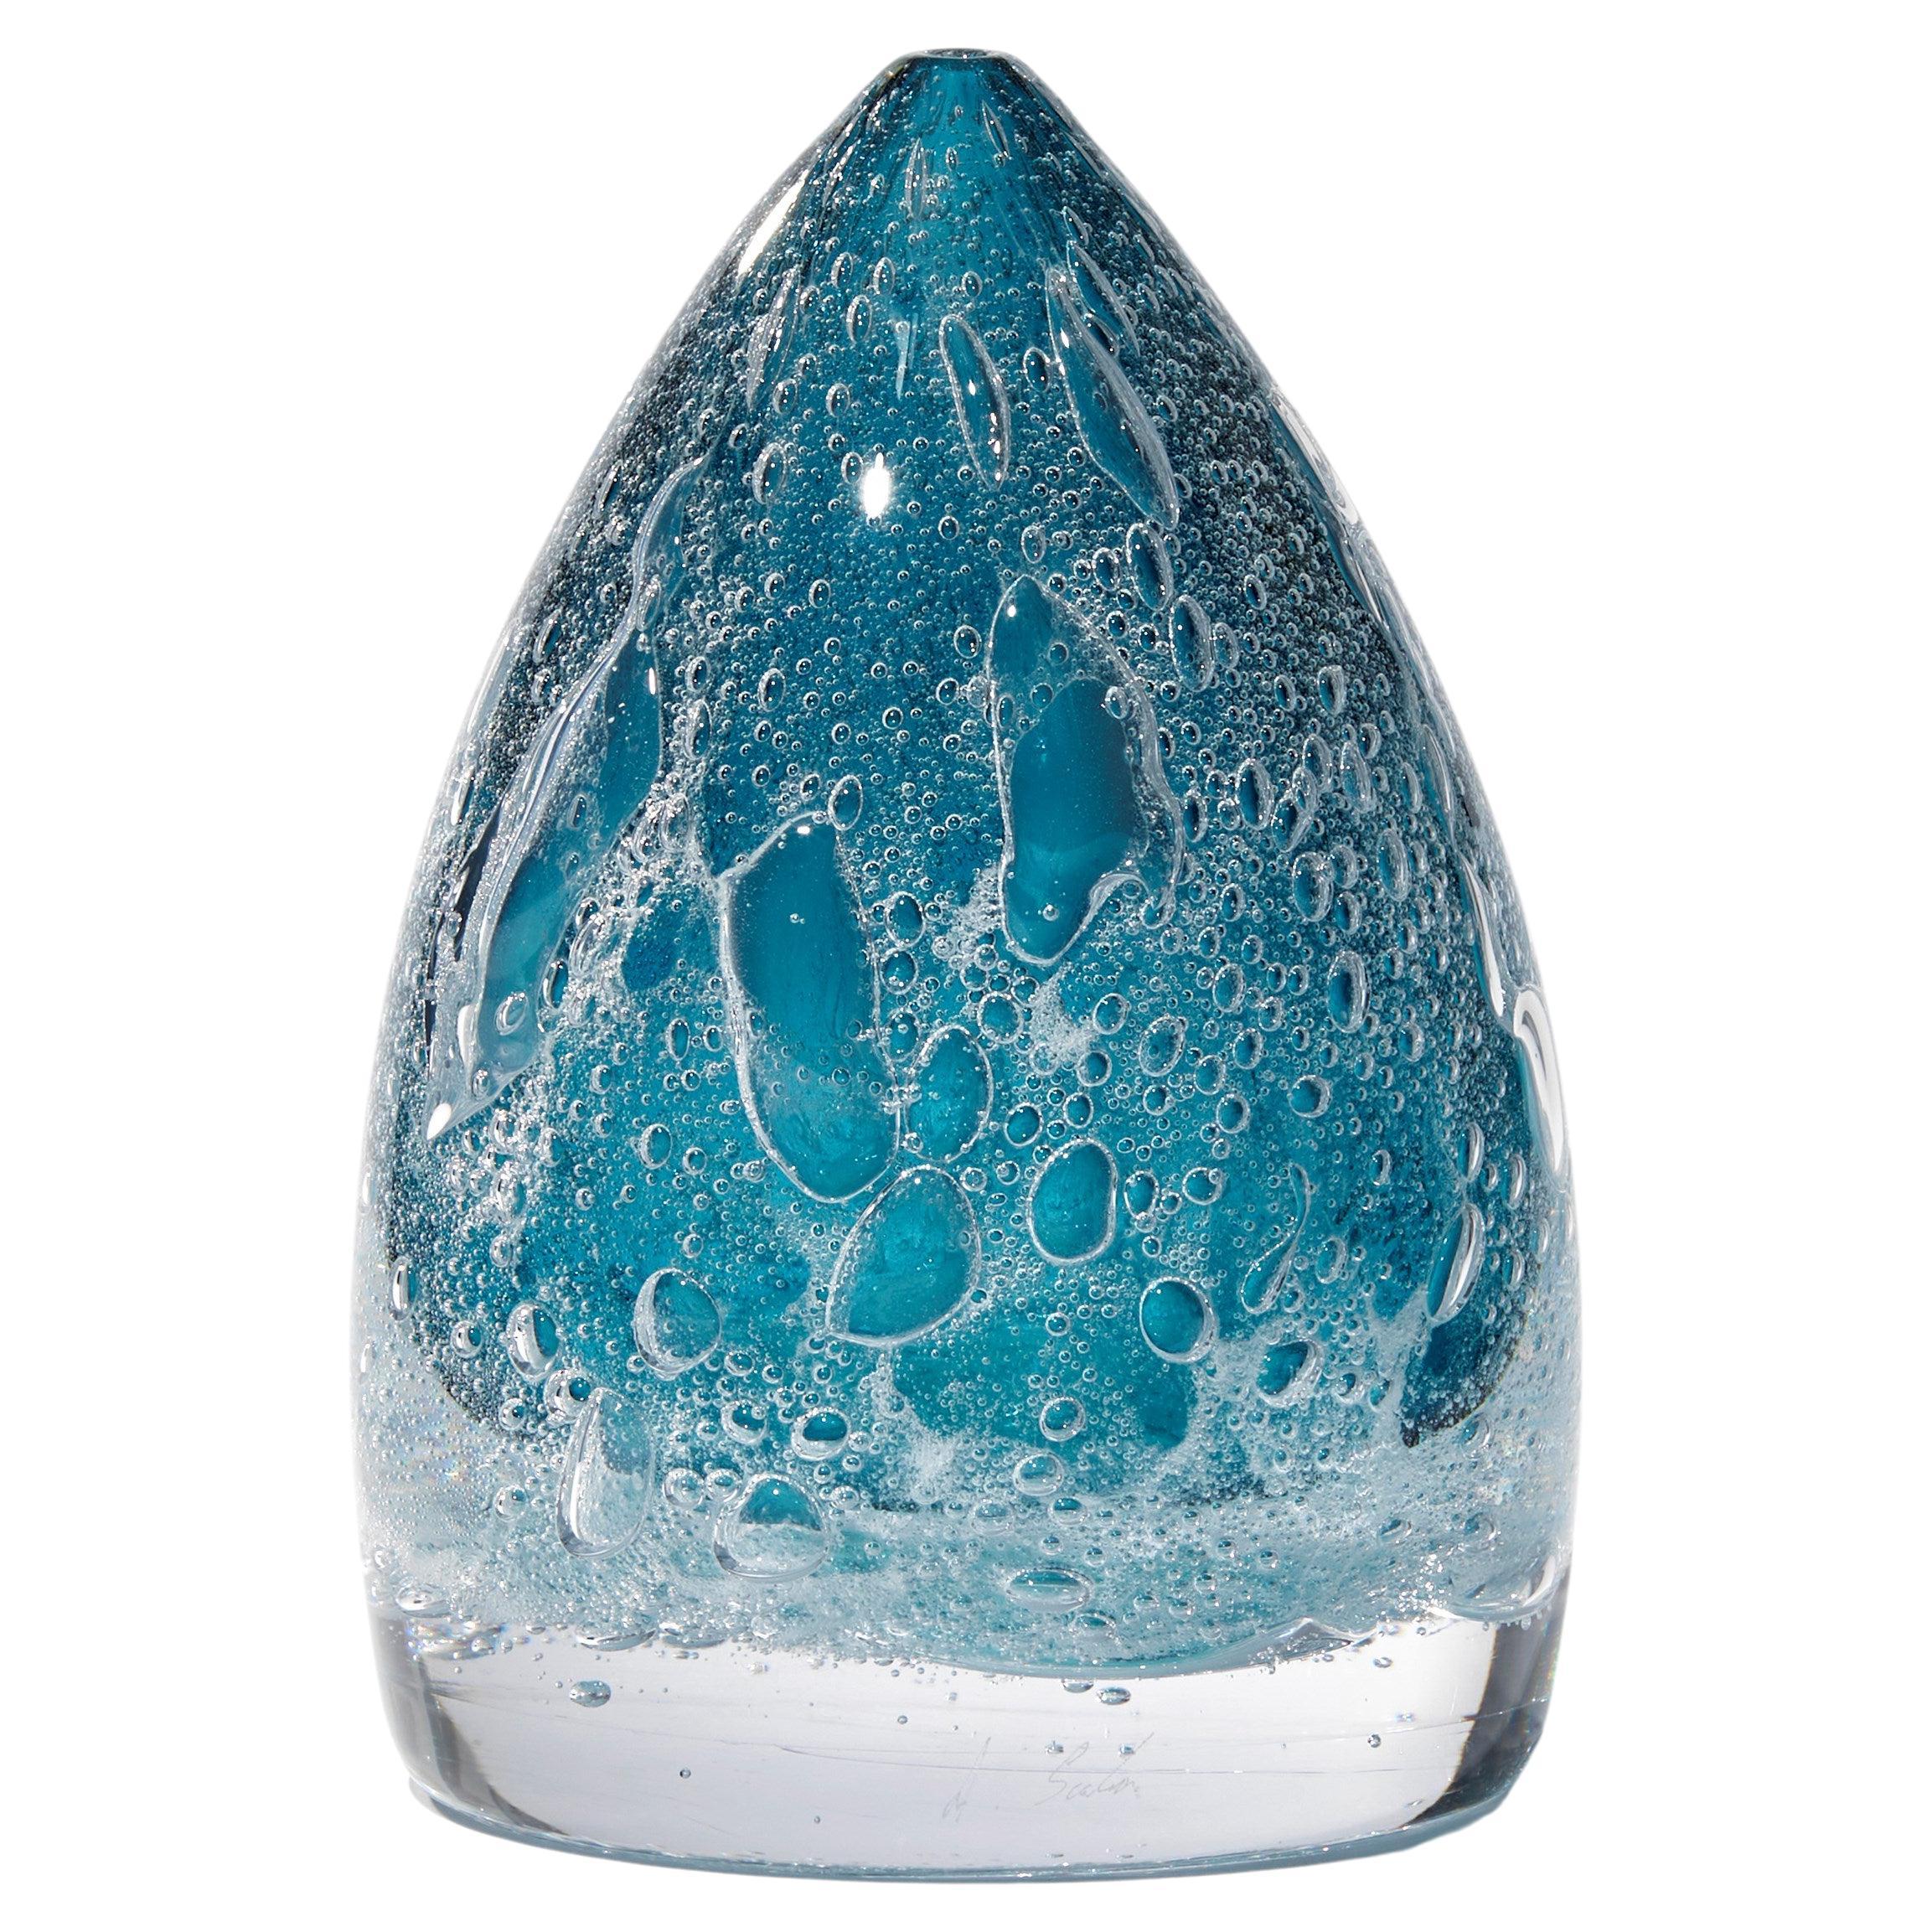 Turbulence in Aqua, A Deep Turquoise Glass Sculpture / Vessel by Anthony Scala